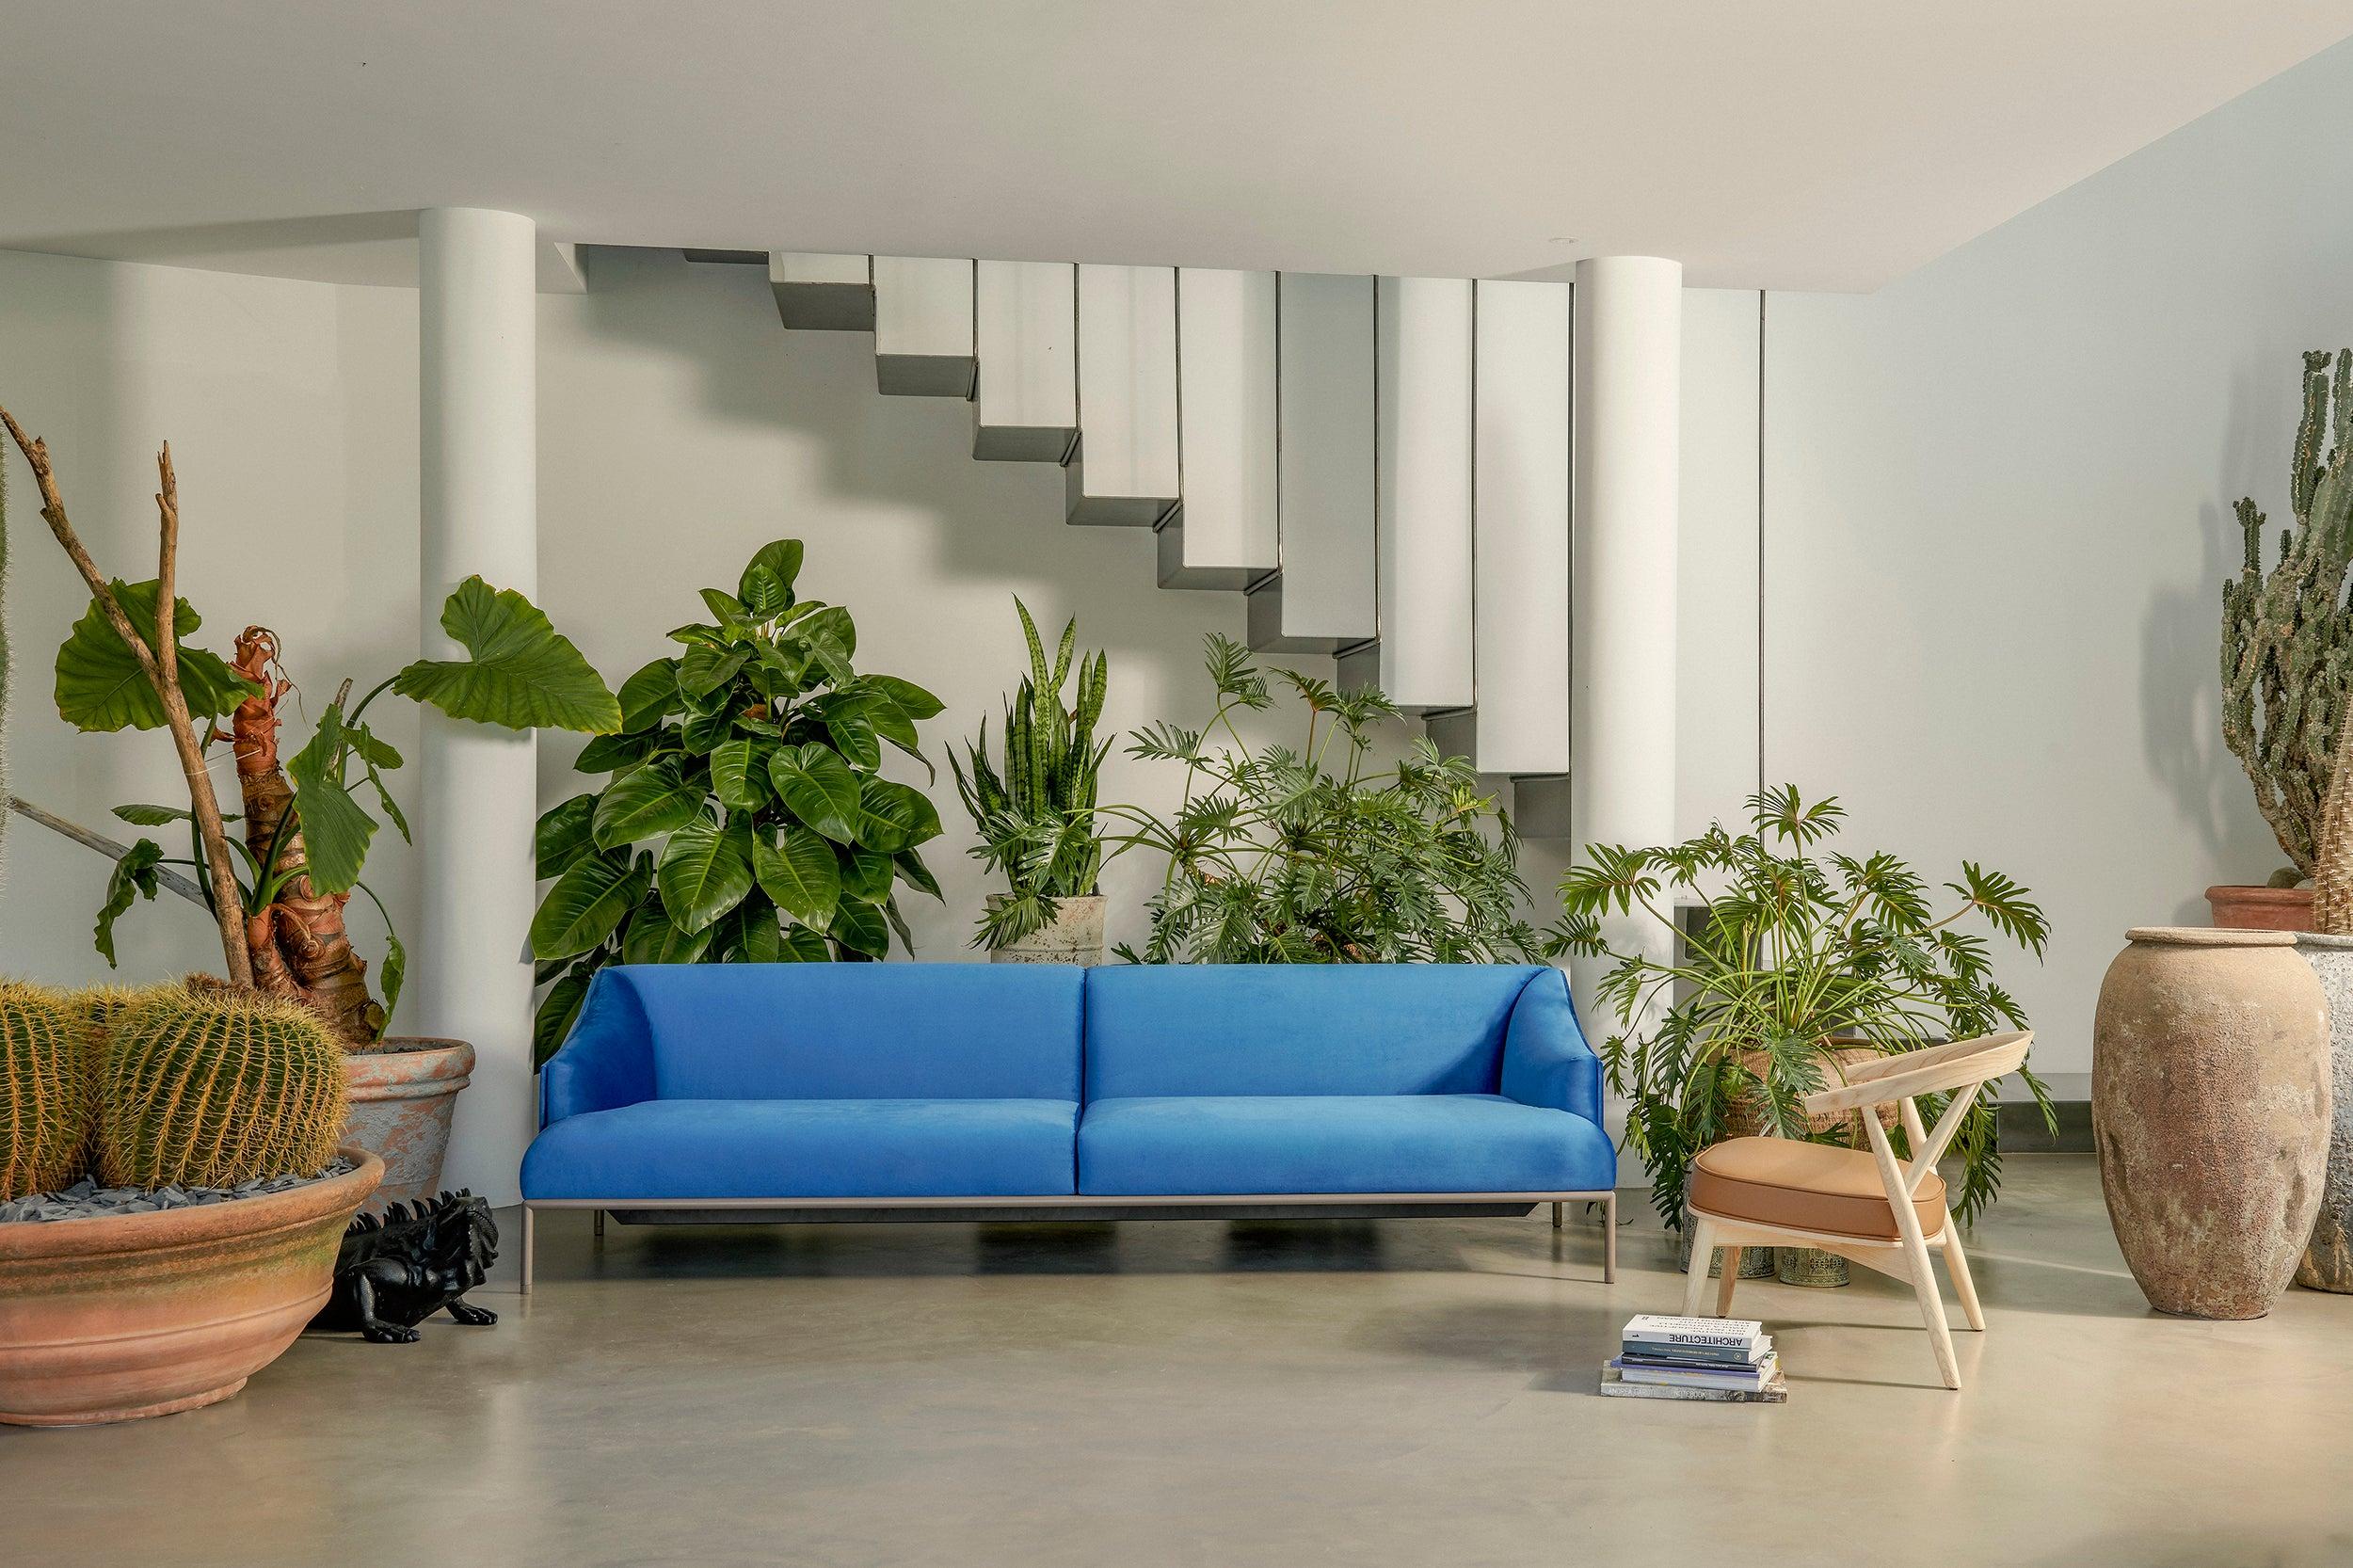 Extreme visual lightness, extreme versatility: the High Time sofa, designed by Christophe Pillet, can be used to create studied, yet essential compositions that reflect the individual taste of those who choose to host it in their personal